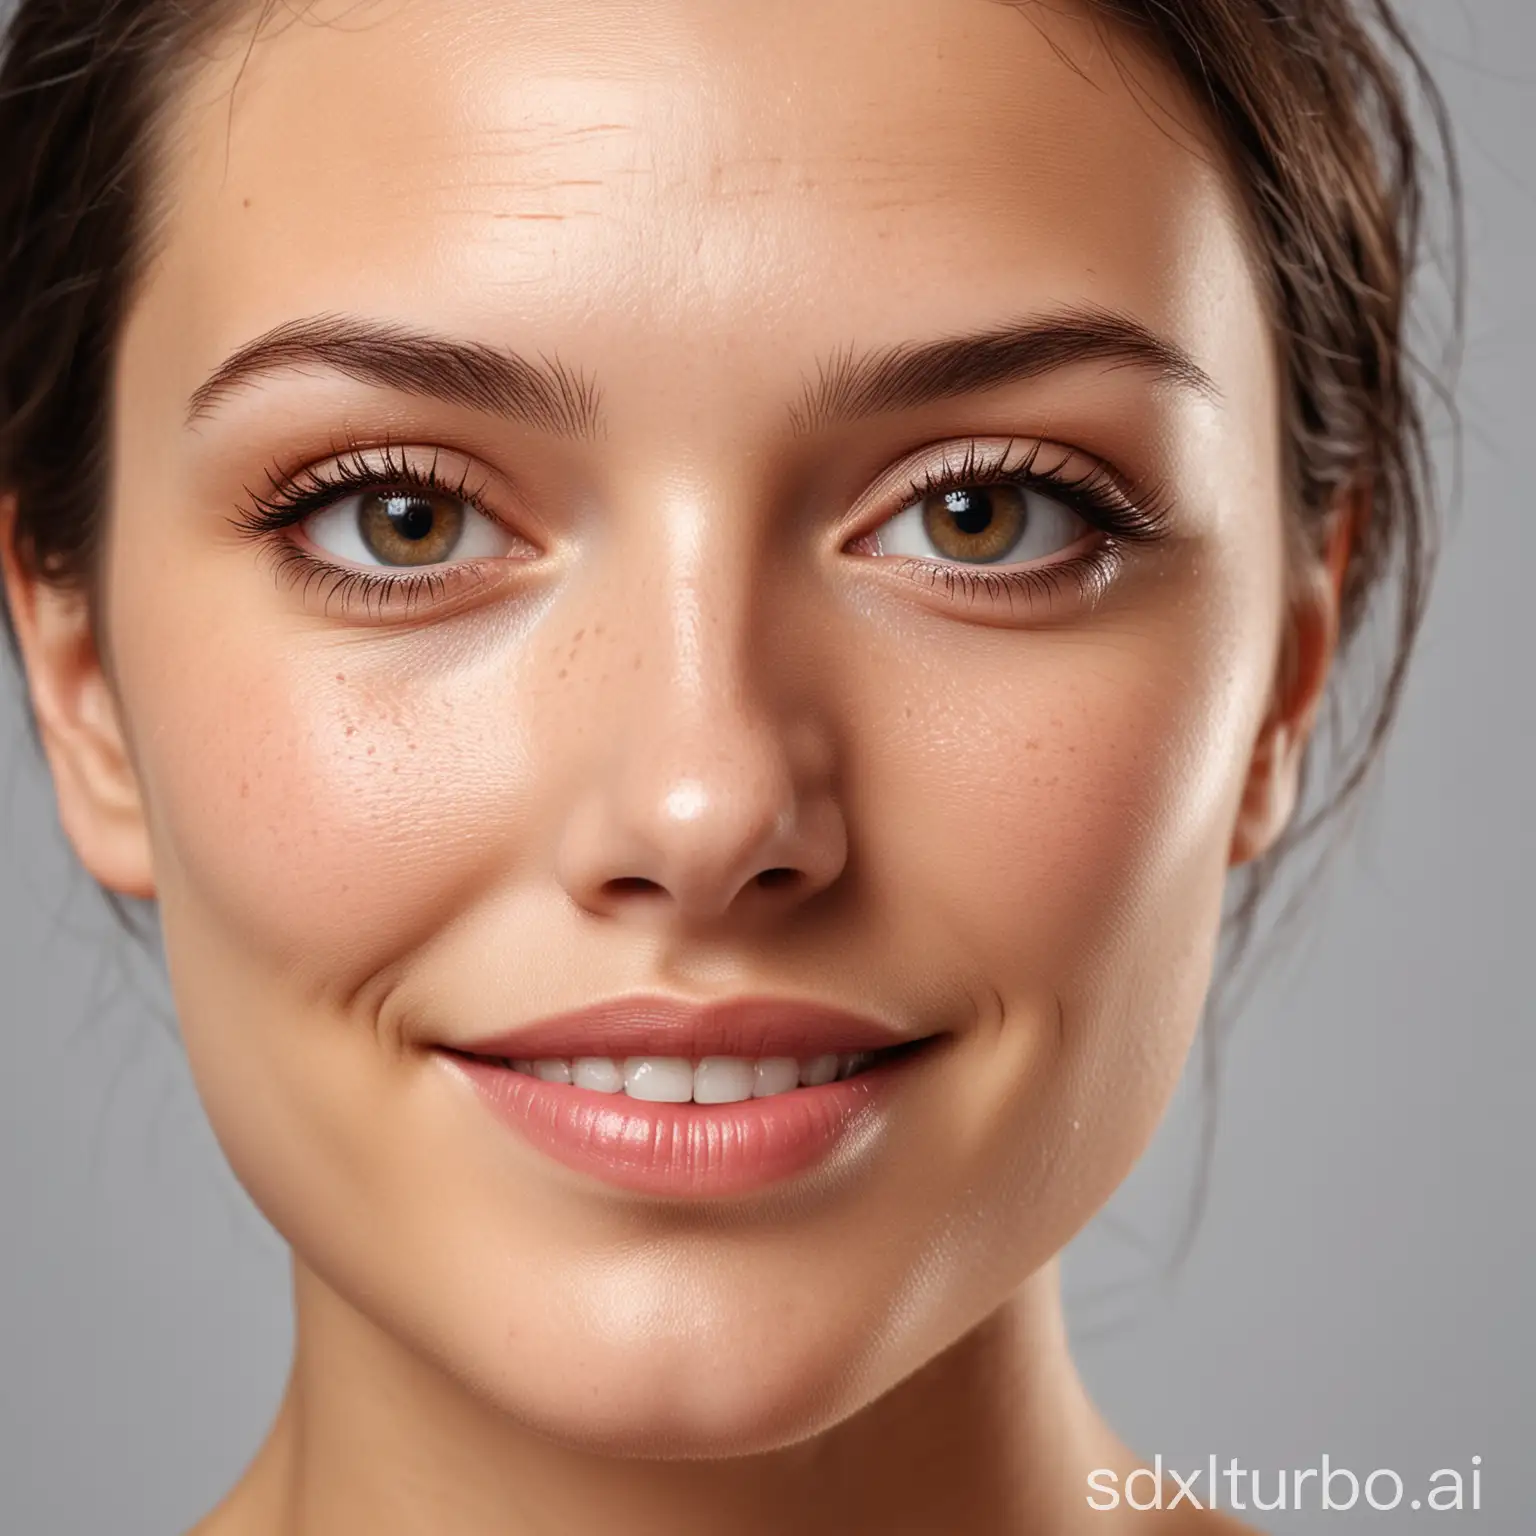 A close-up of a woman's face with clear, radiant skin. The woman is looking at the camera with a confident smile on her face. Her skin is smooth, even-toned, and free of blemishes.